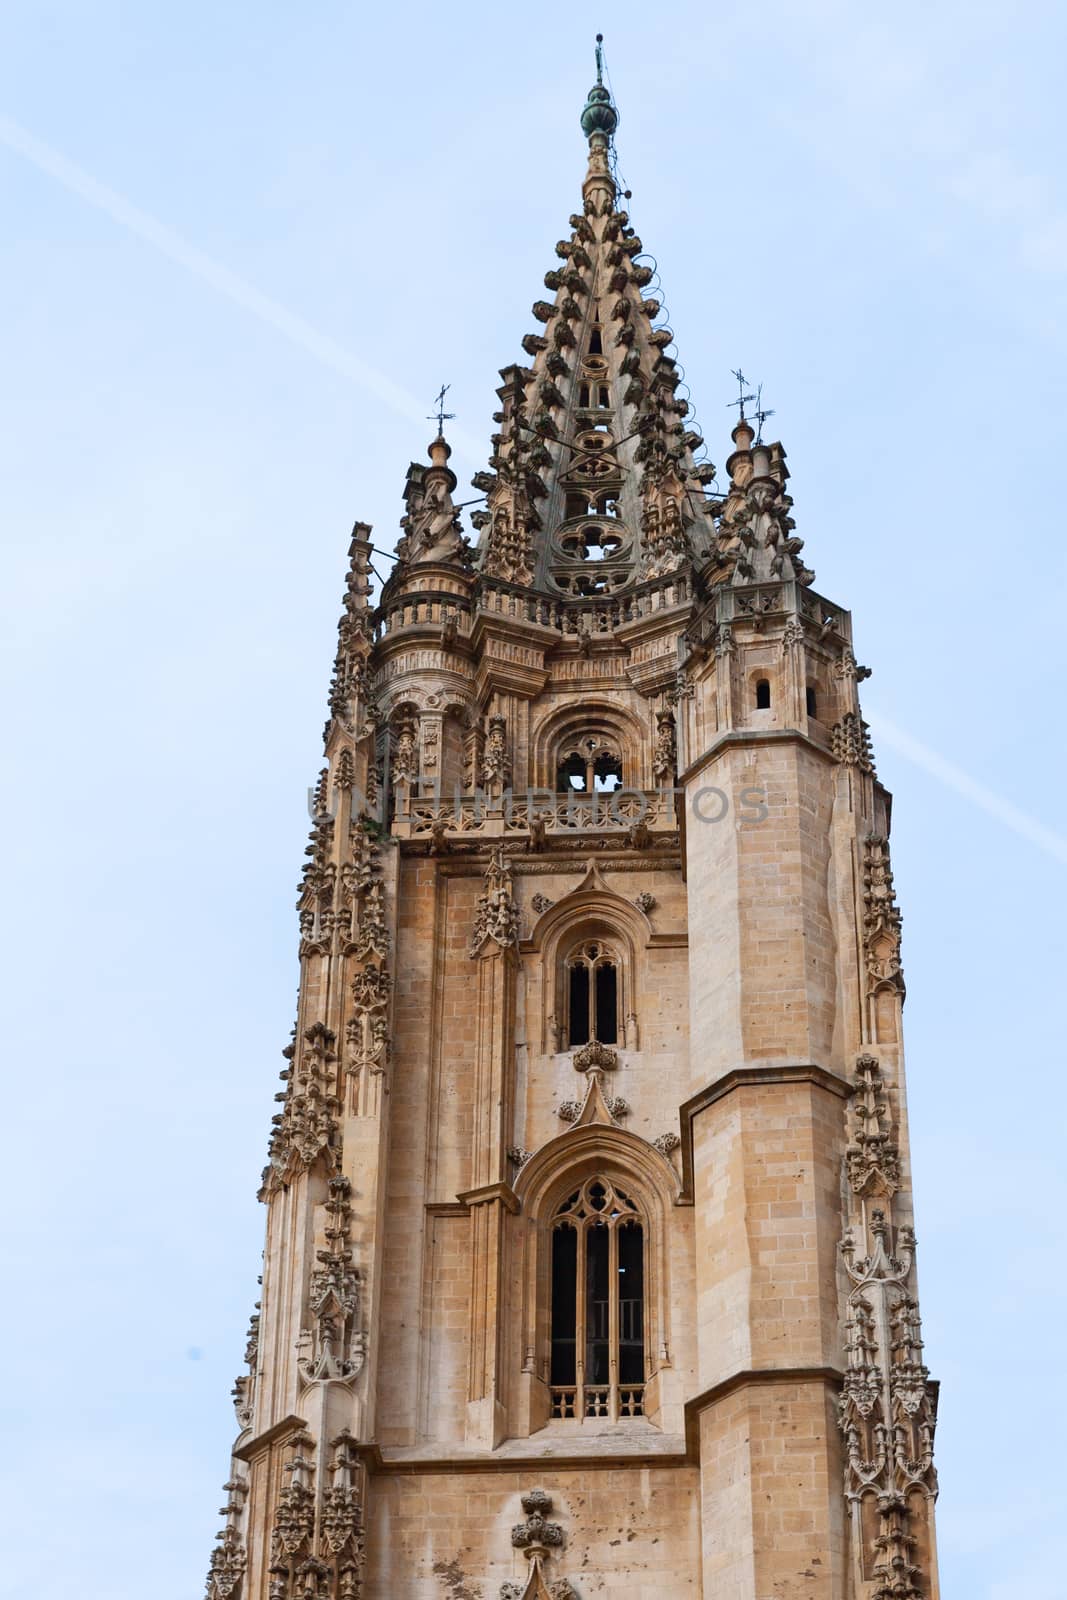 Bell-tower of Cathedral of San Salvador, Oviedo, Spain by vlad-m